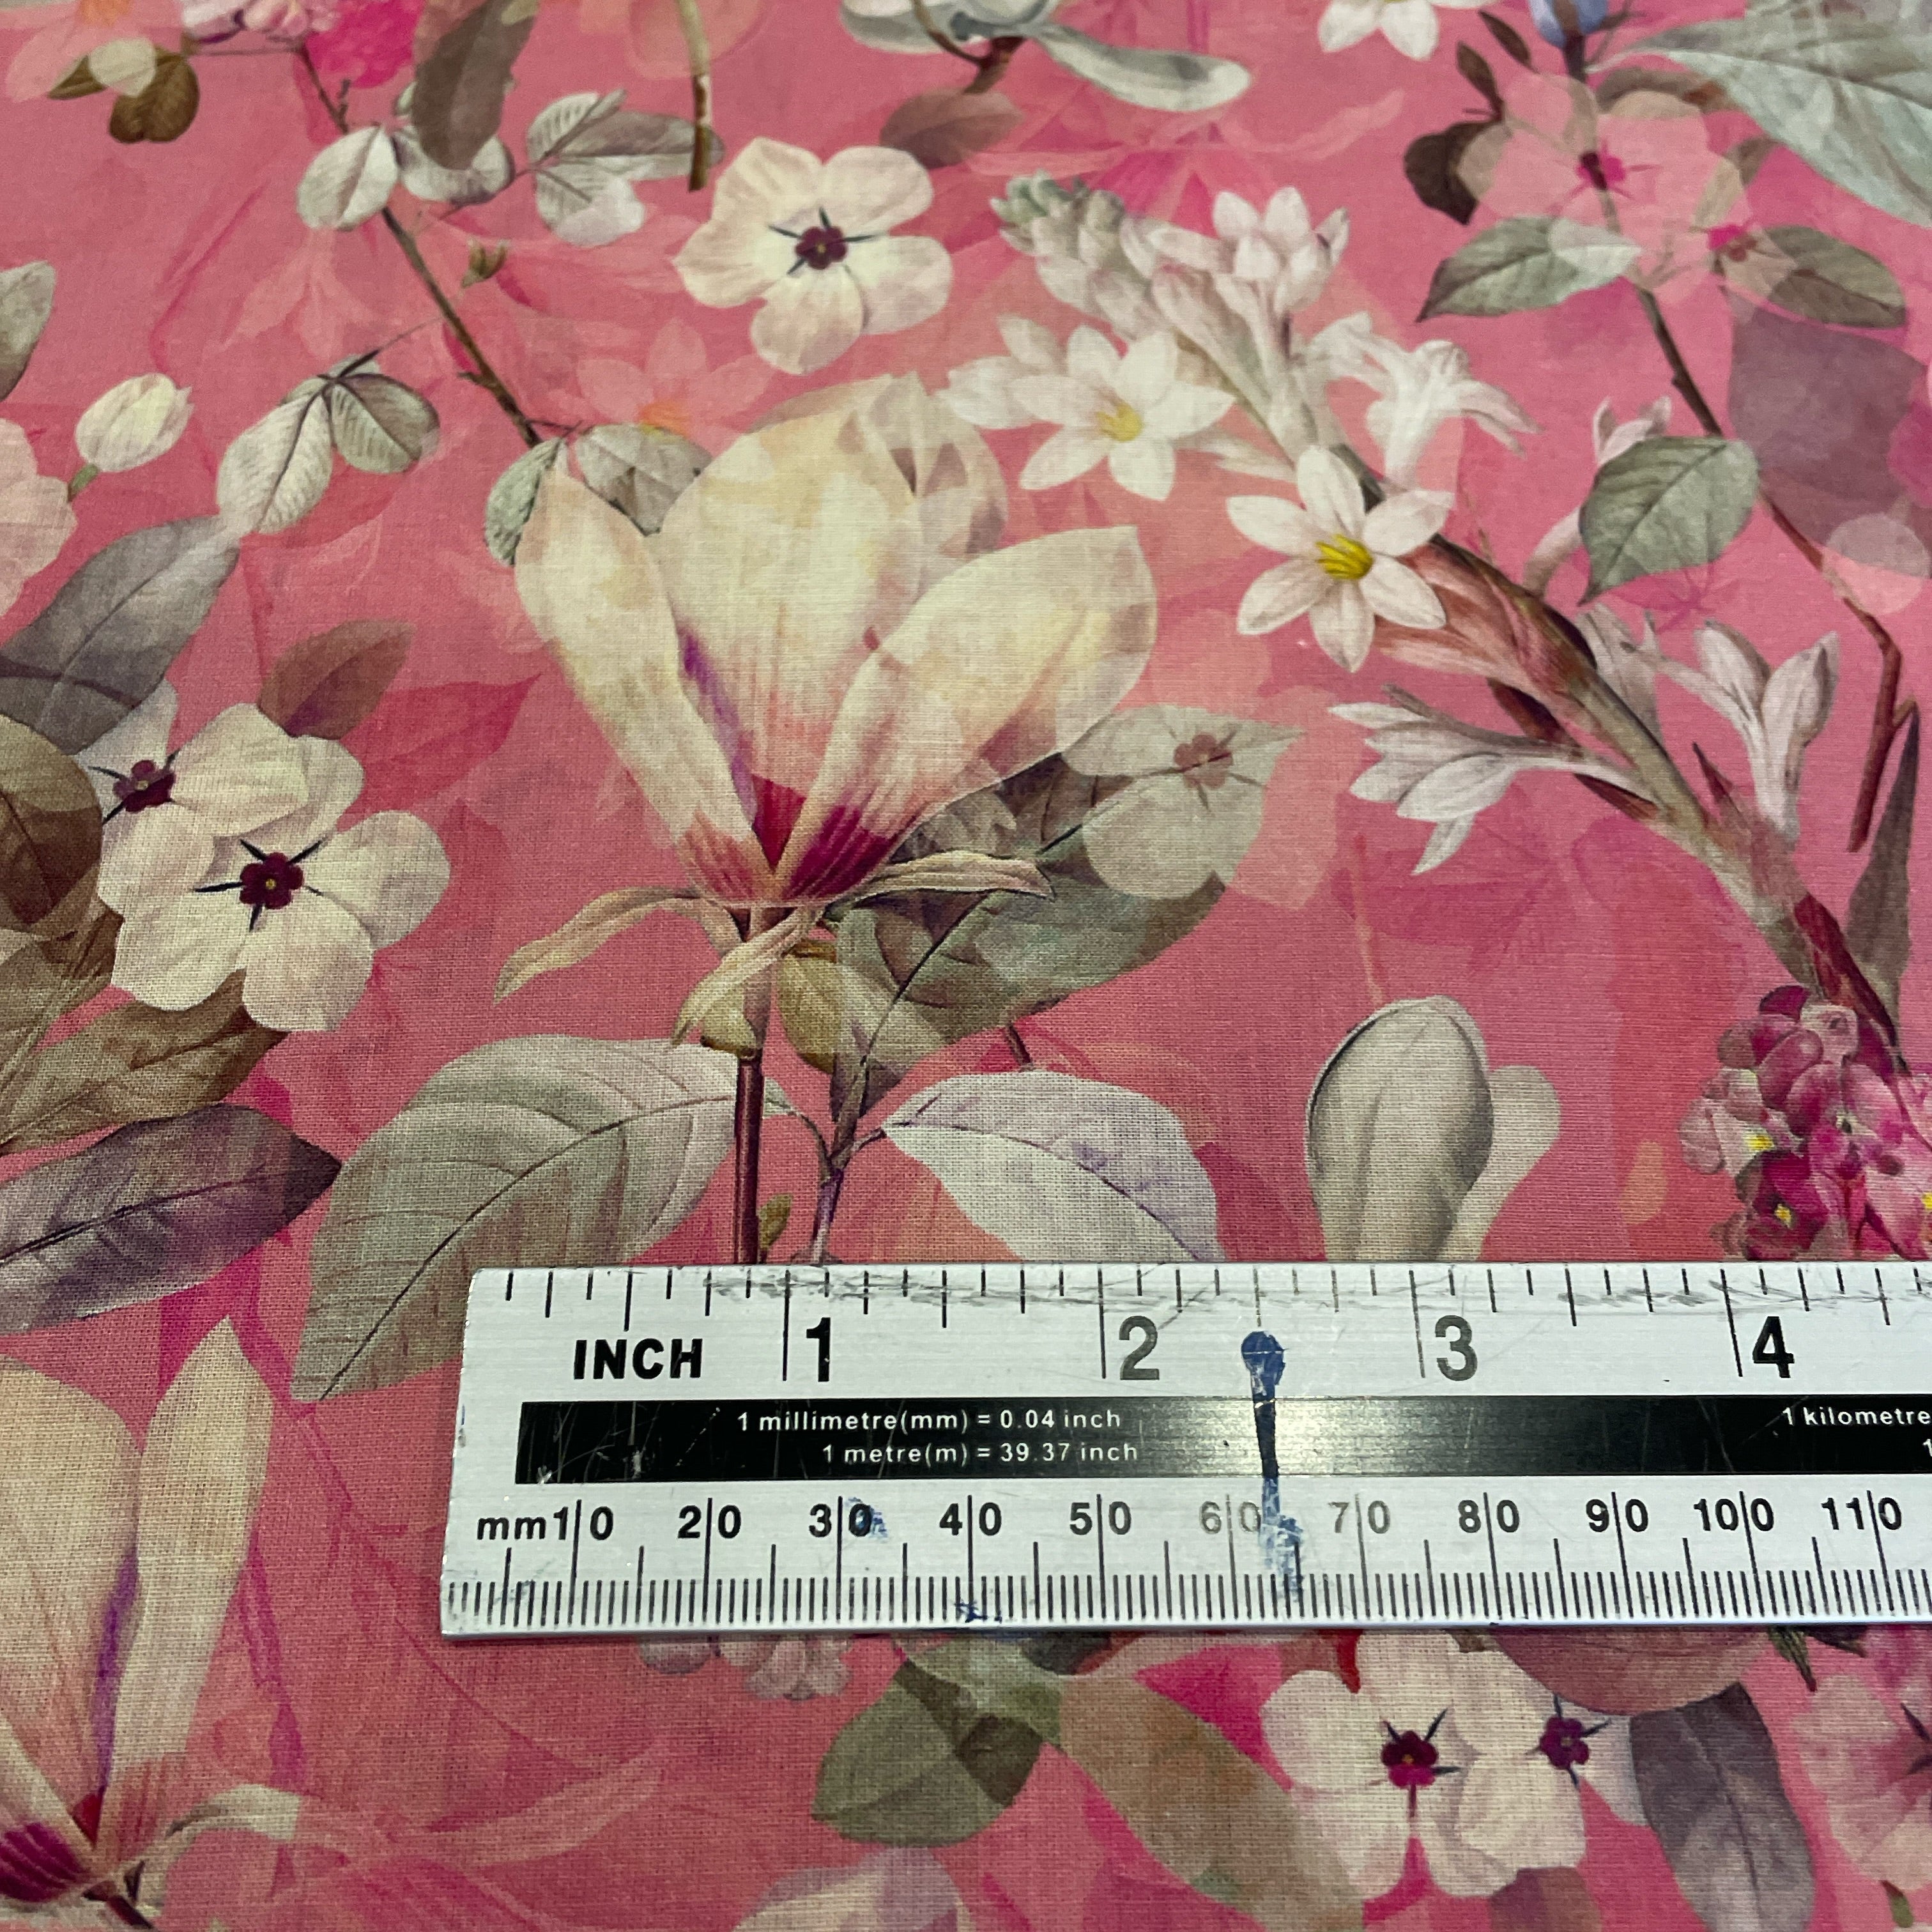 Luxurious rose pink Digital Cotton Lawn floral prints are lightweight and soft with beautiful drape – perfect for dresses, blouses, skirts and crafts. At a width of 135cm / 53" and a weight of 75gsm